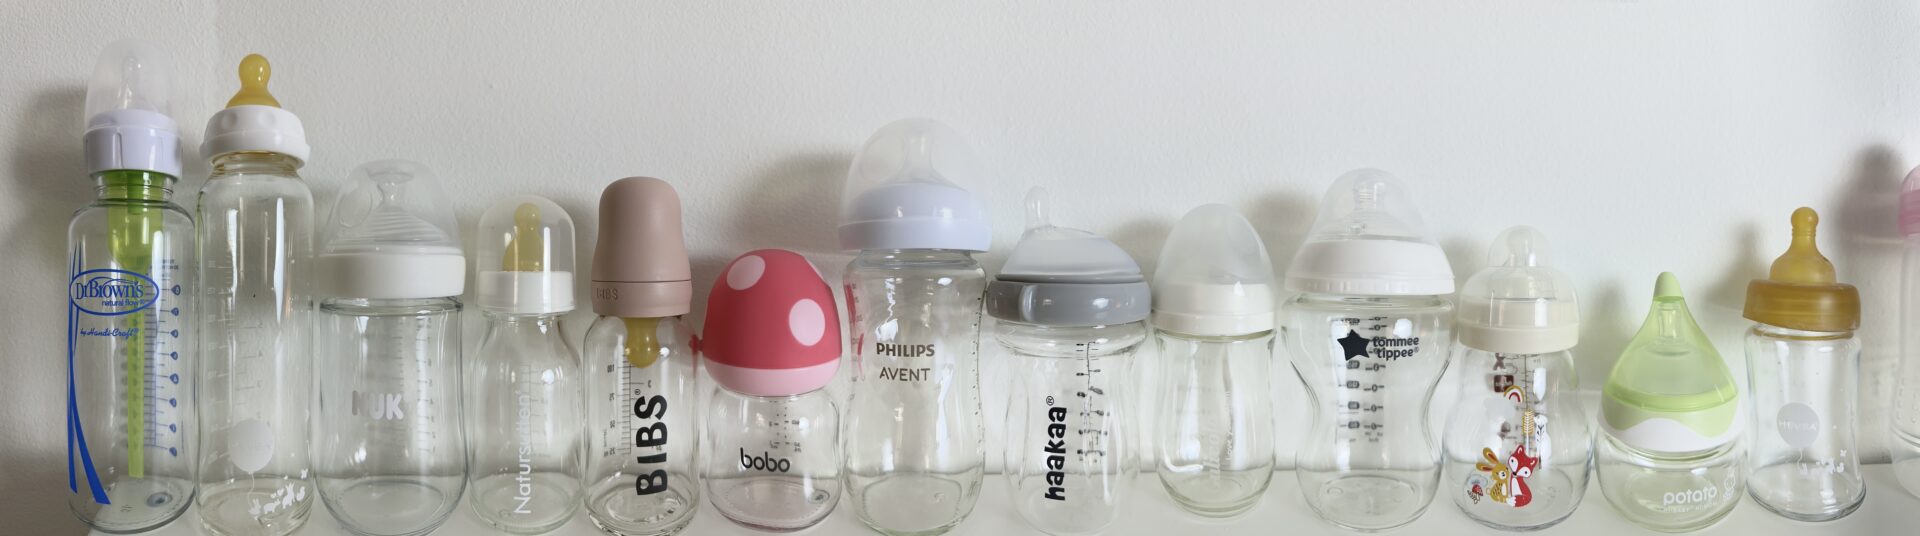 Baby bottles tested for lead by Eric Ritter